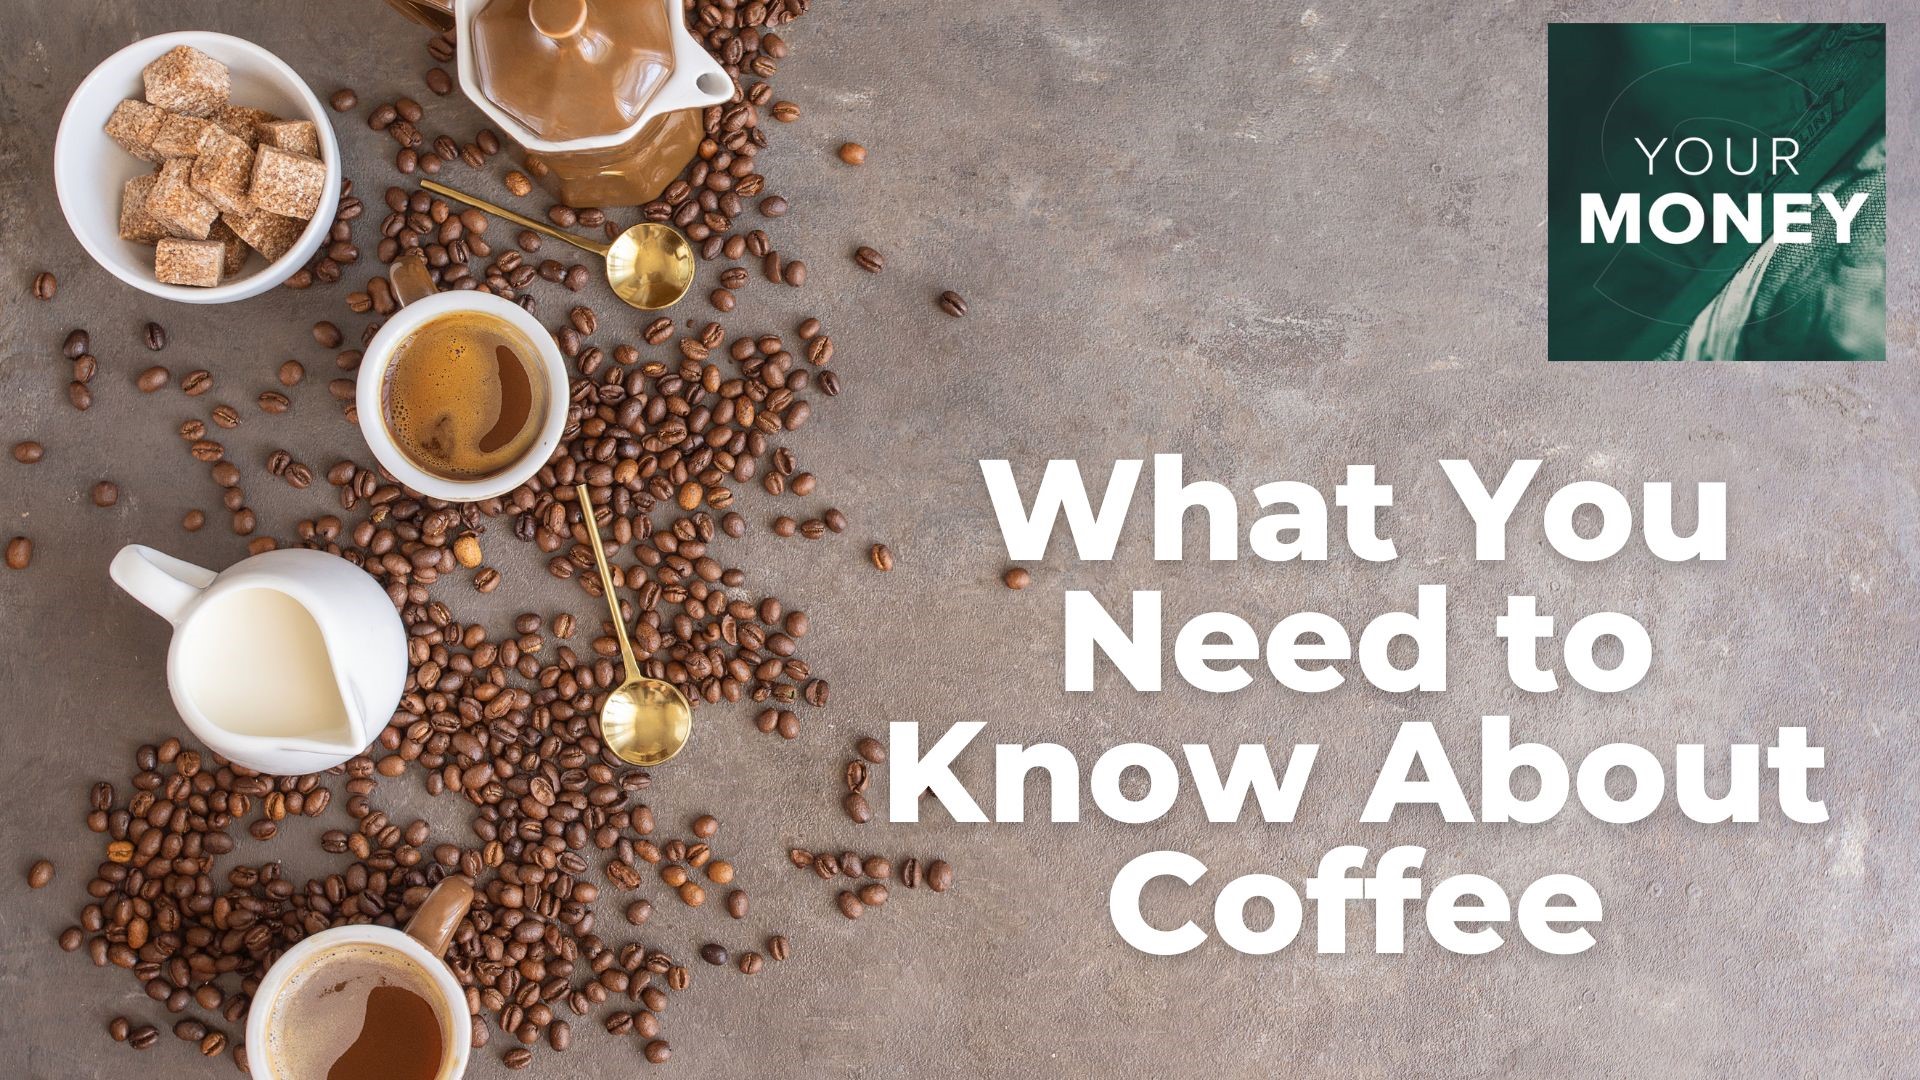 Can cutting back on your coffee shop stops help you save money? Gordon Severson explains what you need to know, how to make the perfect cup at home and more.